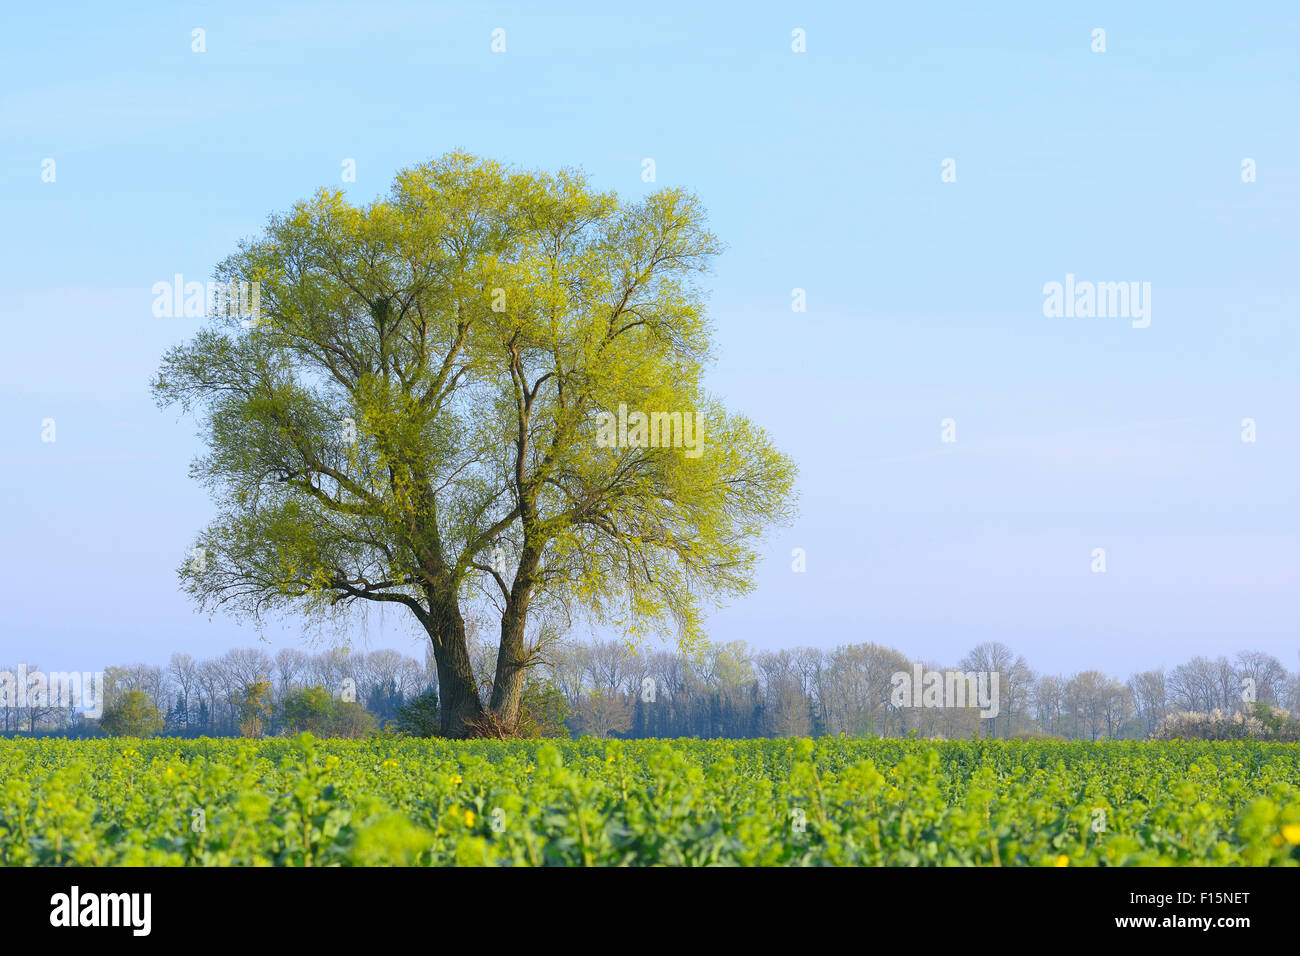 Tree in field of green plants in Early Spring, Kuehkopf-Knoblochsaue Nature Reserve, Hesse, Germany, Europe Stock Photo